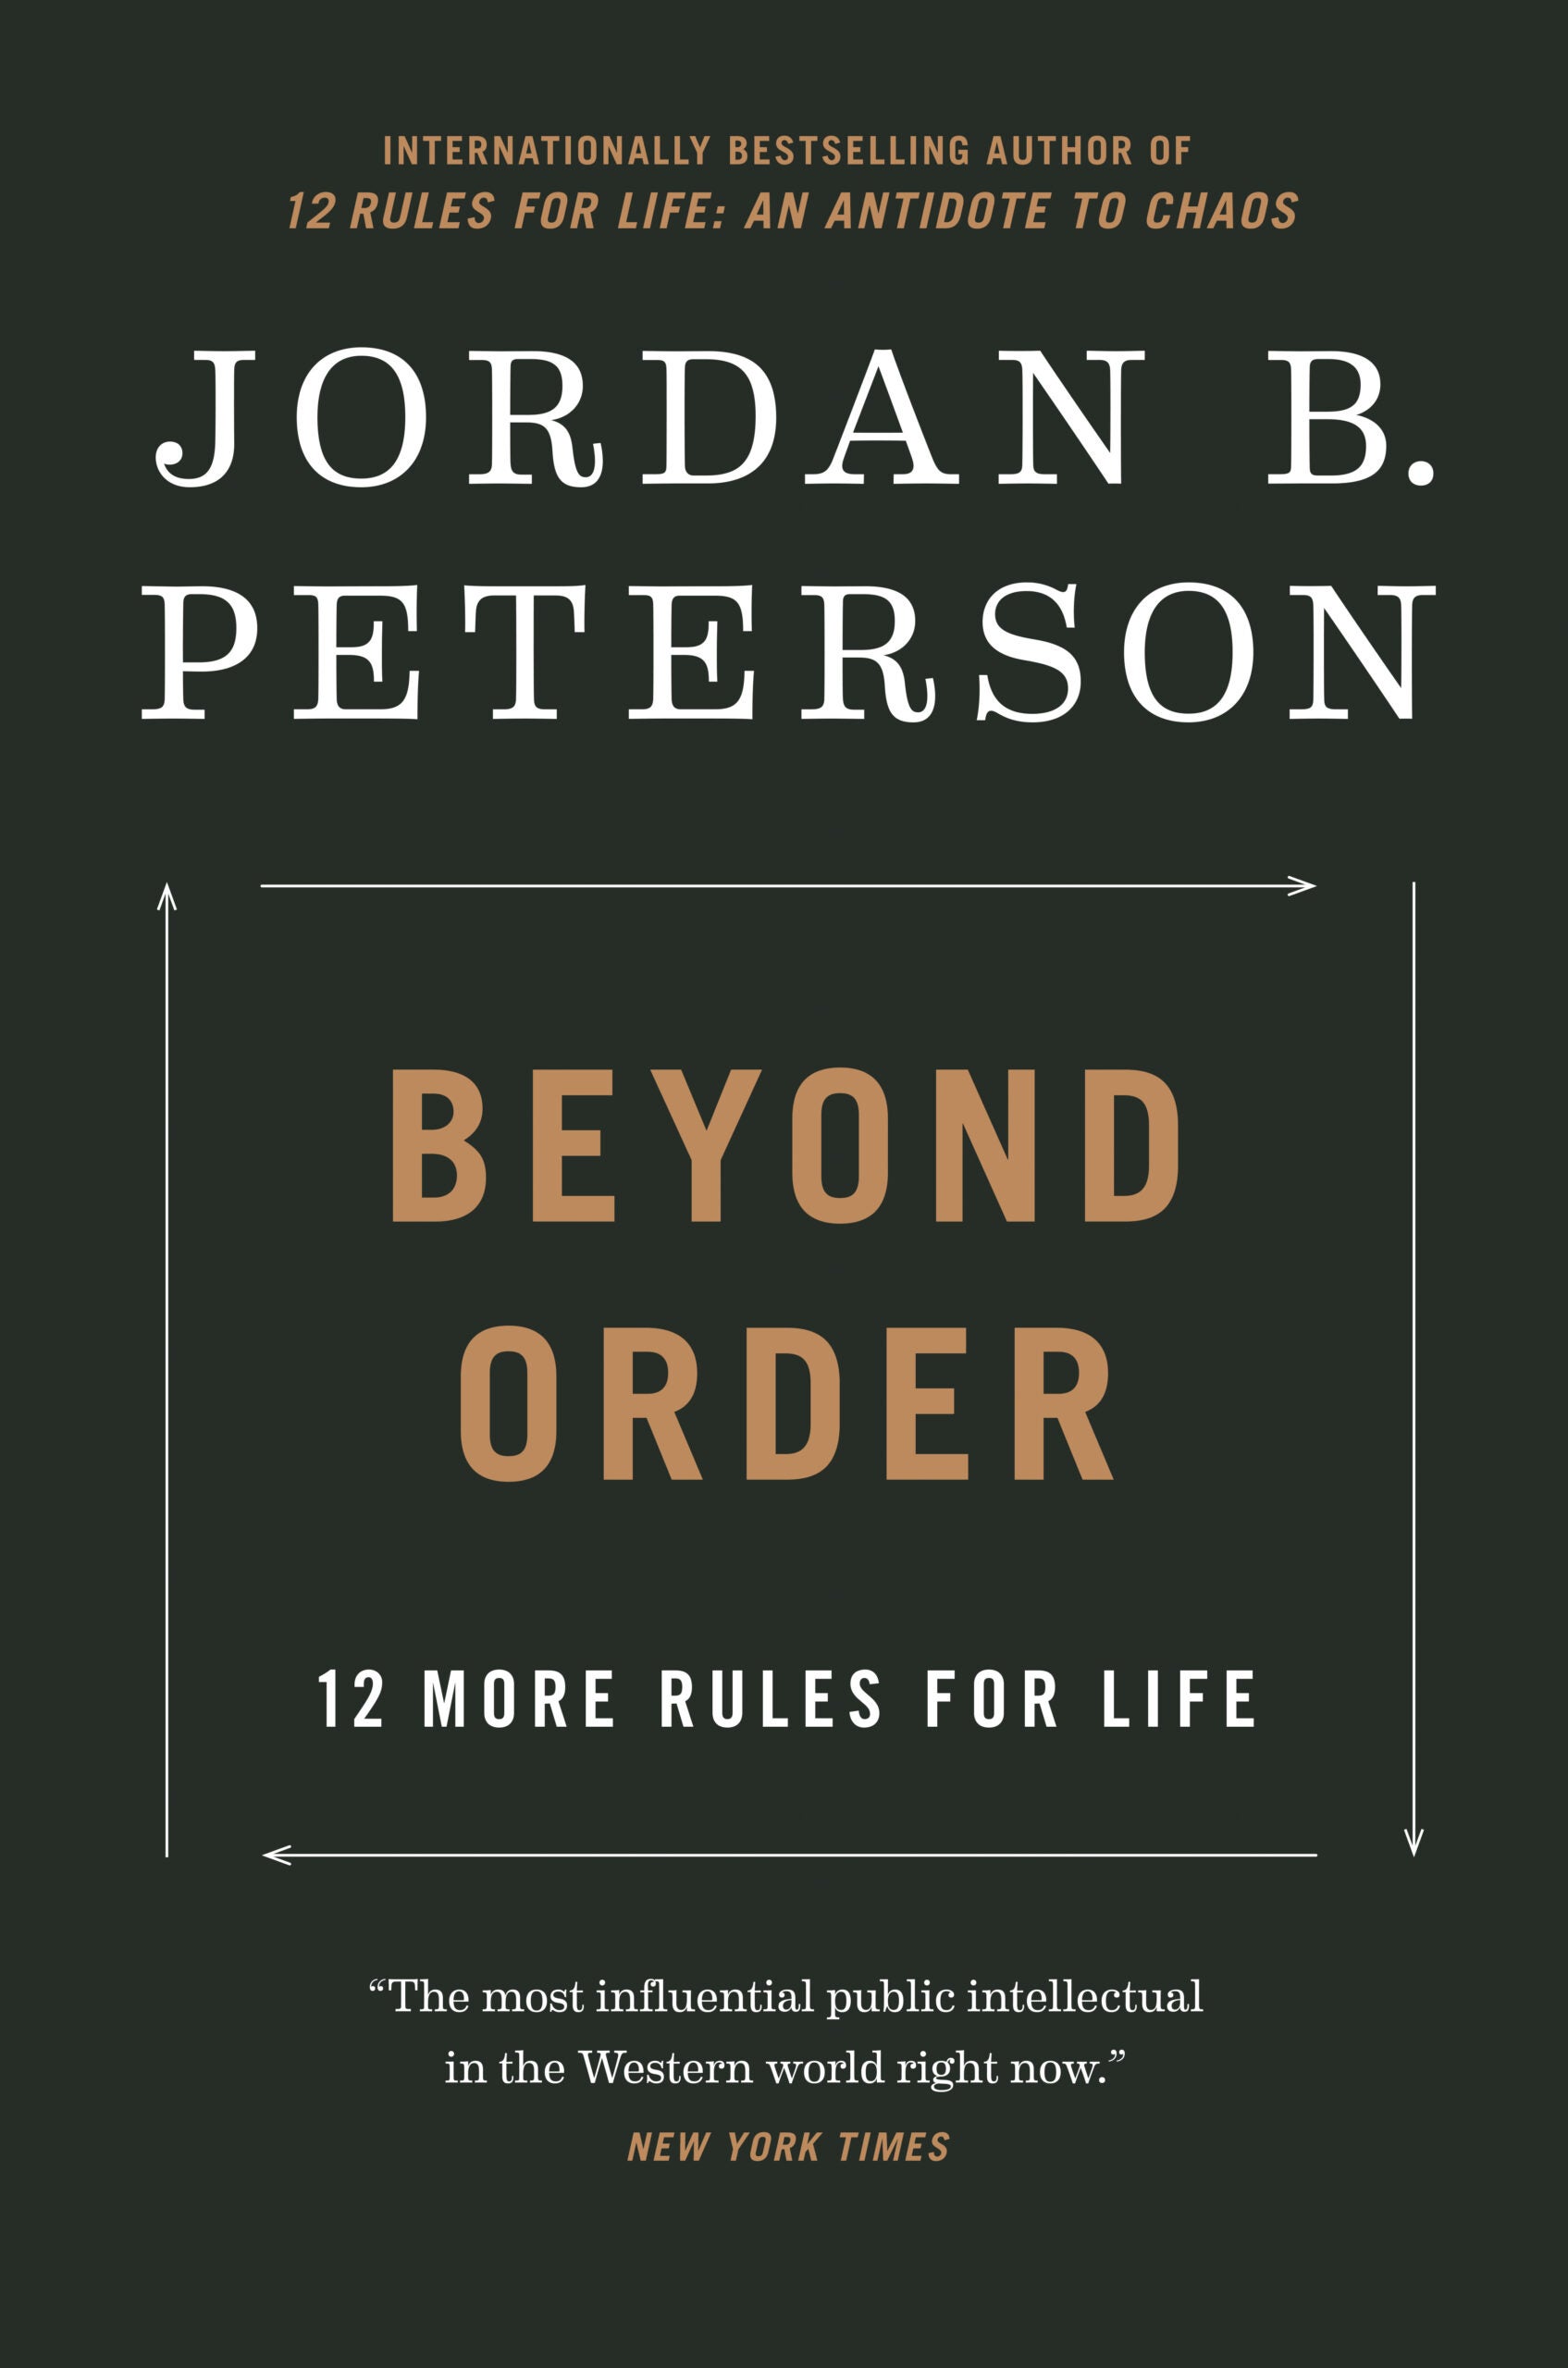 The Sequel to Jordan B. Peterson’s Global Bestseller is Coming March, 2021!